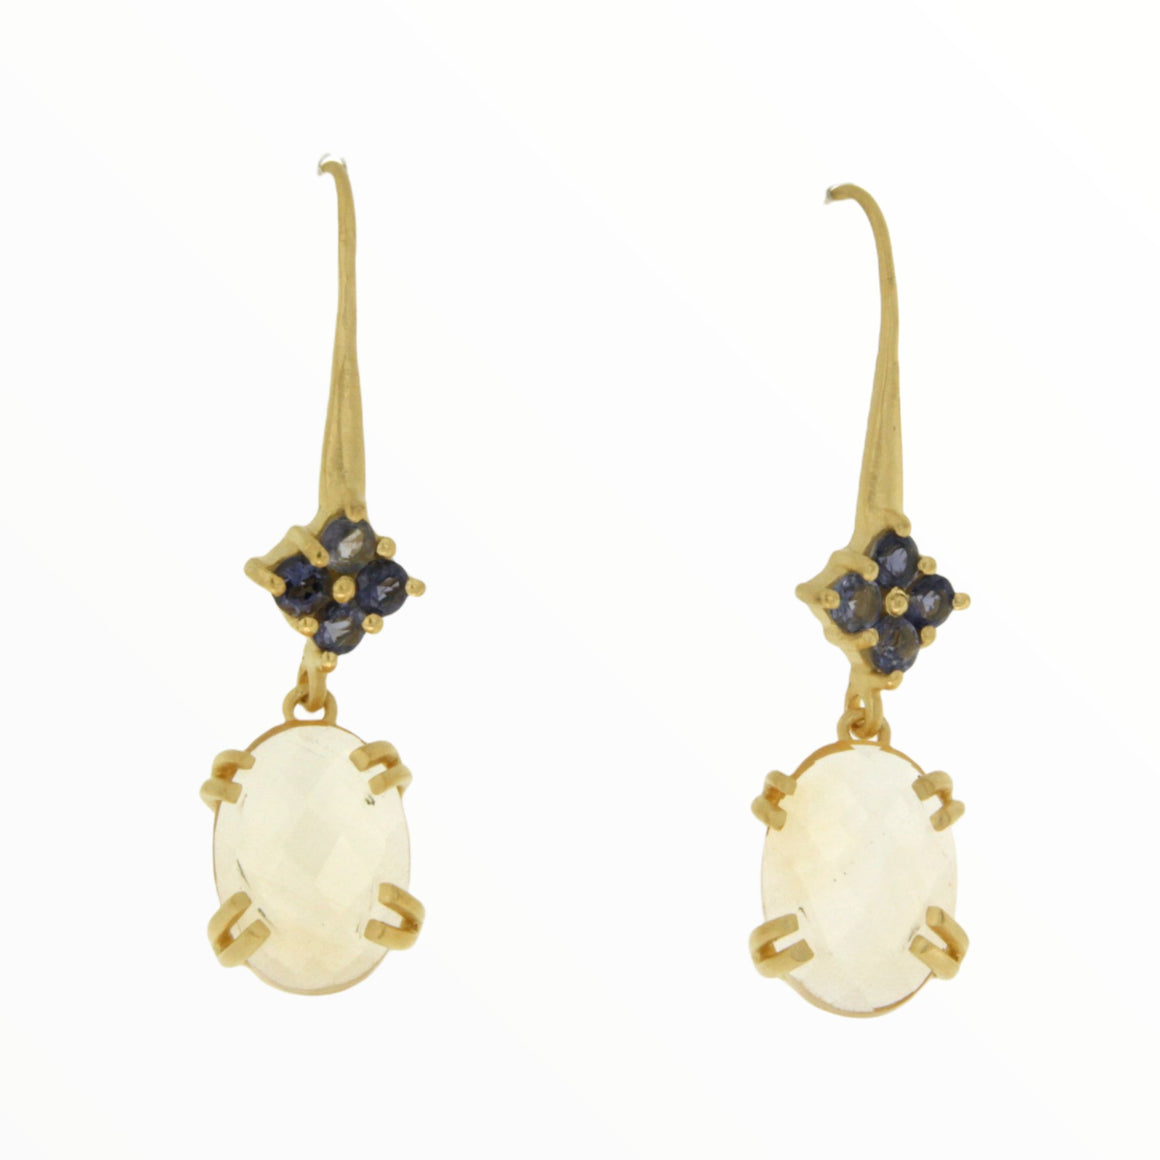 Sofia Bluemoon Drop Earrings in Iolite and Citrine